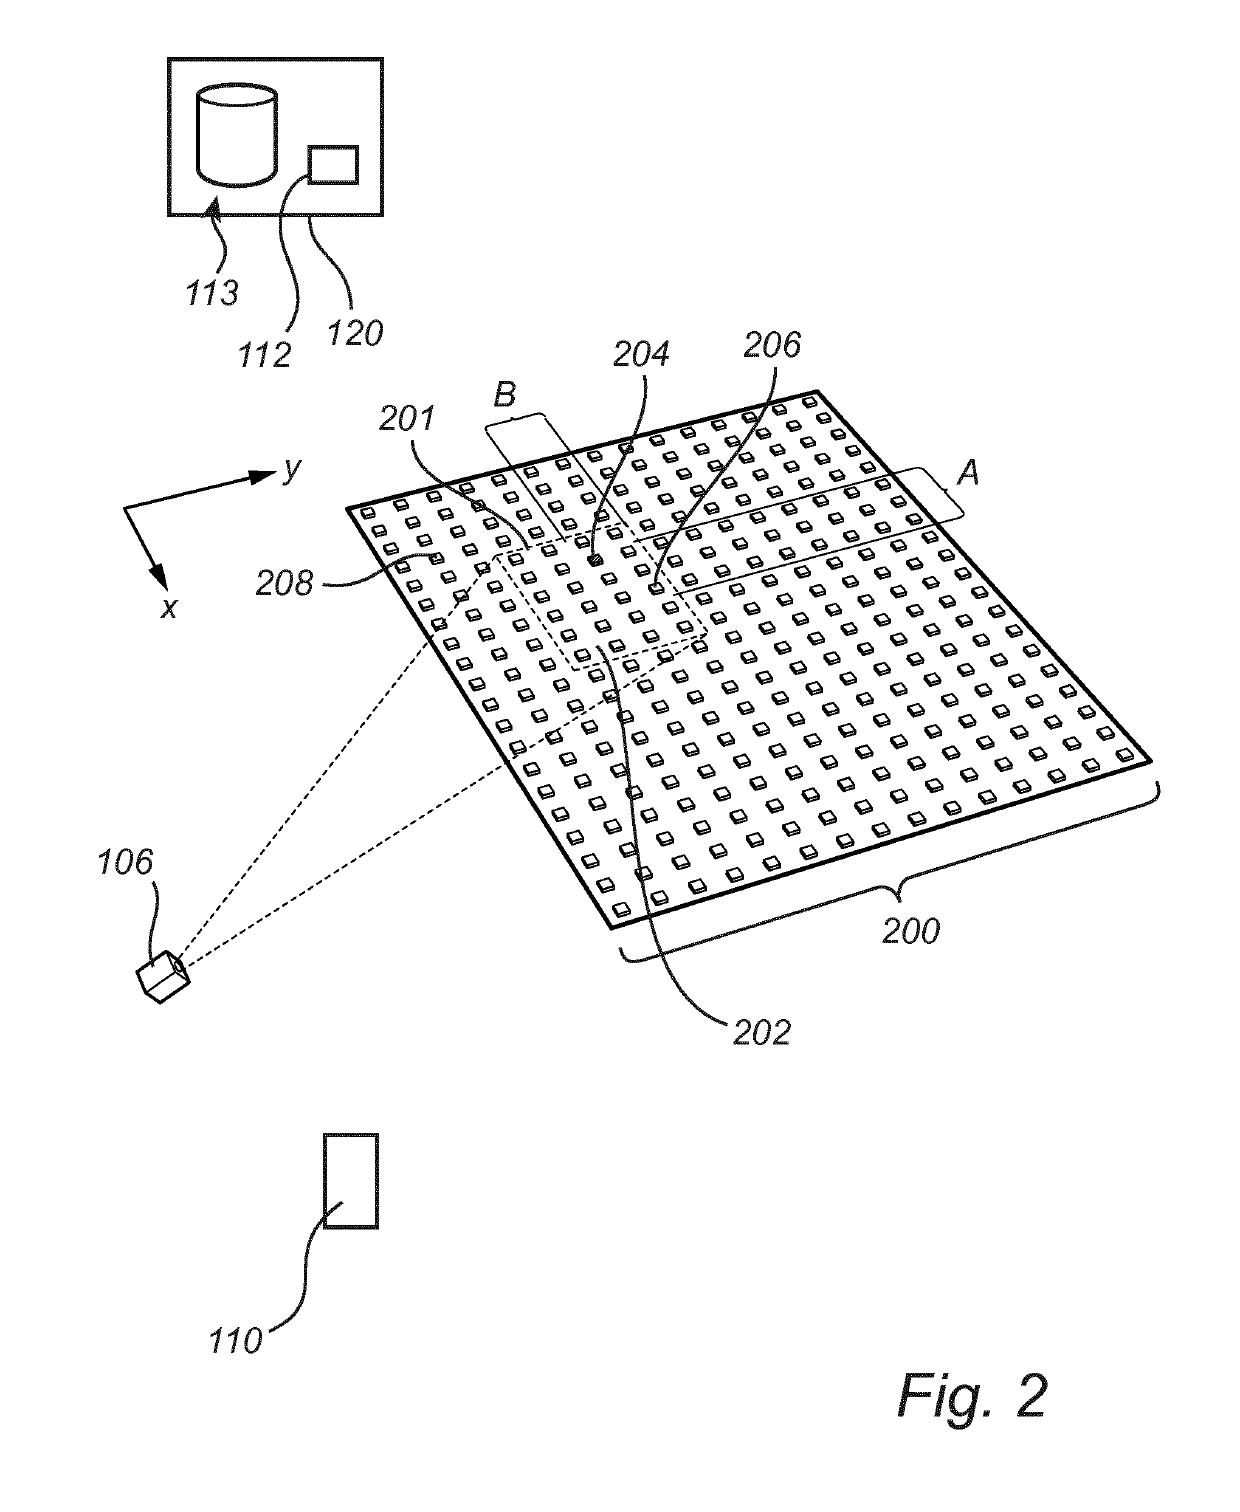 Method for automatic positioning of lamps in a greenhouse environment